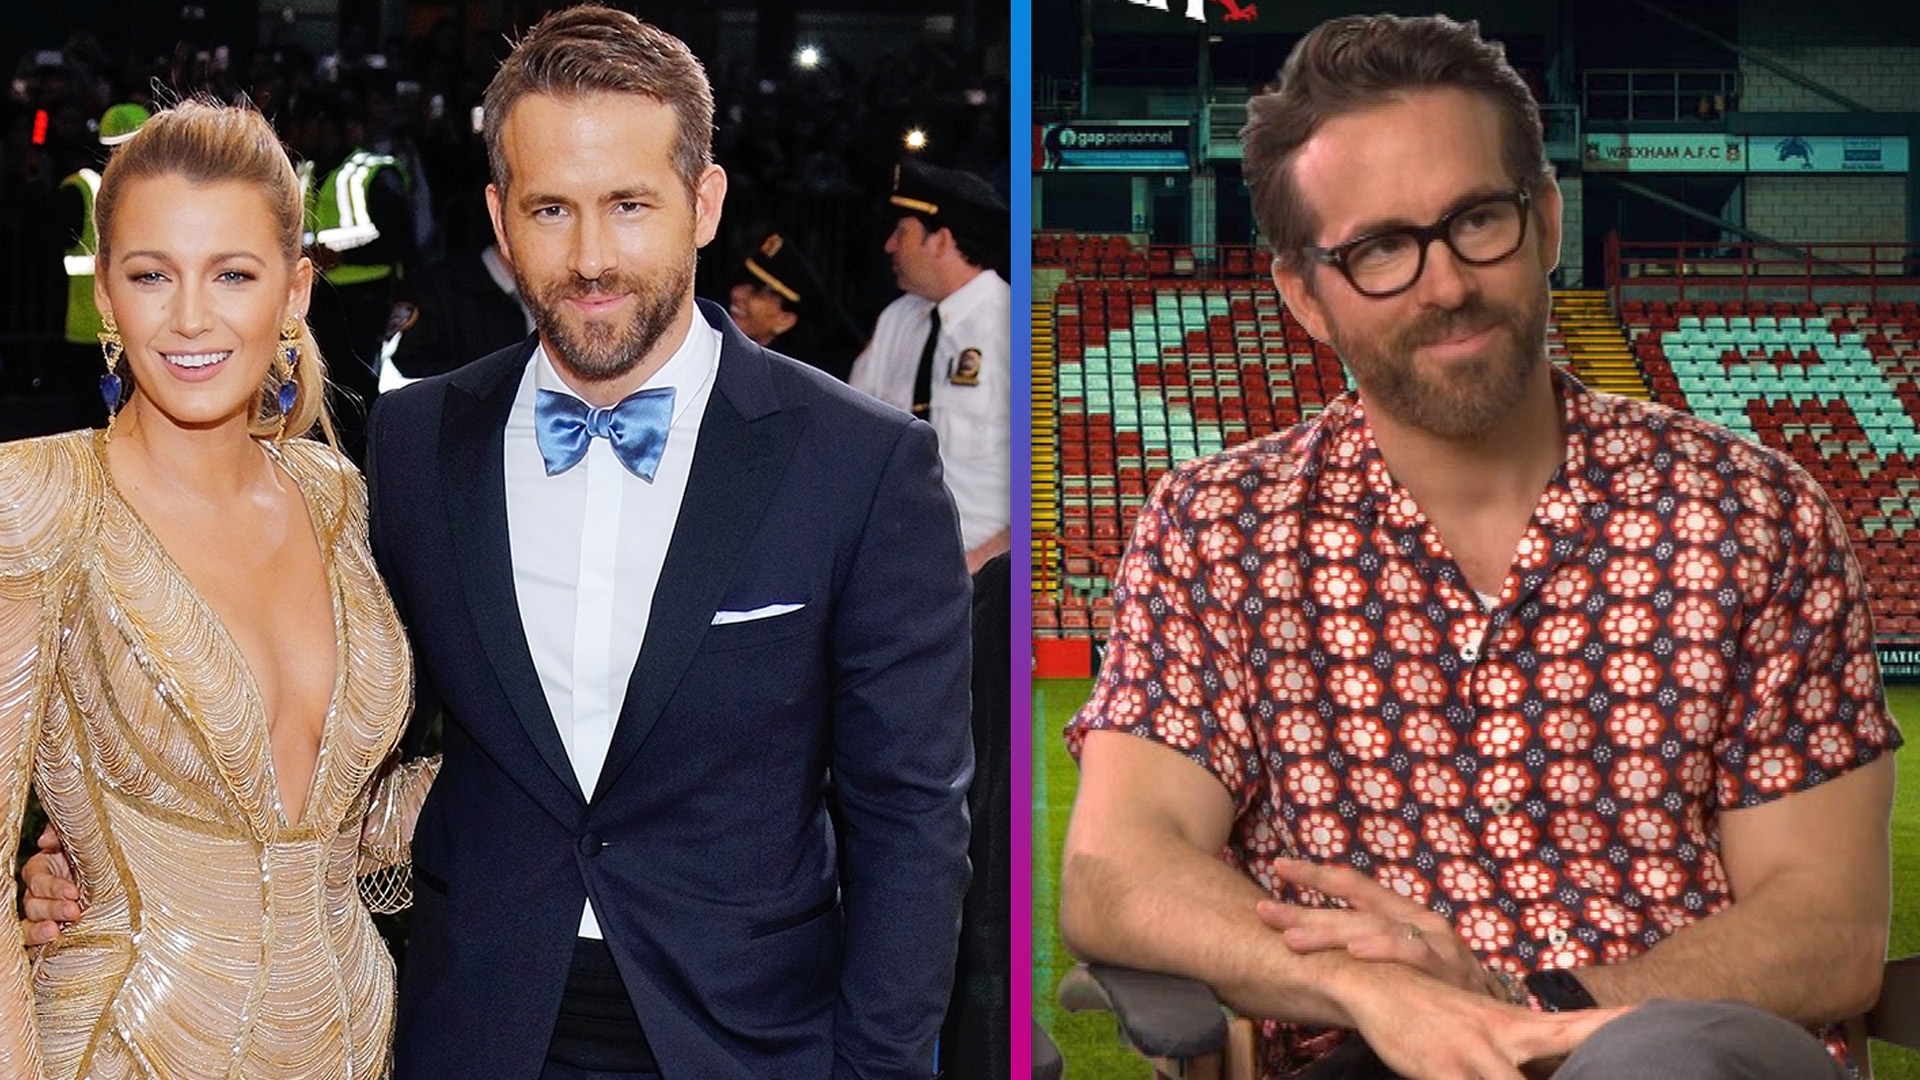 Ryan Reynolds gifts fans a well hung look at his latest project - Queerty